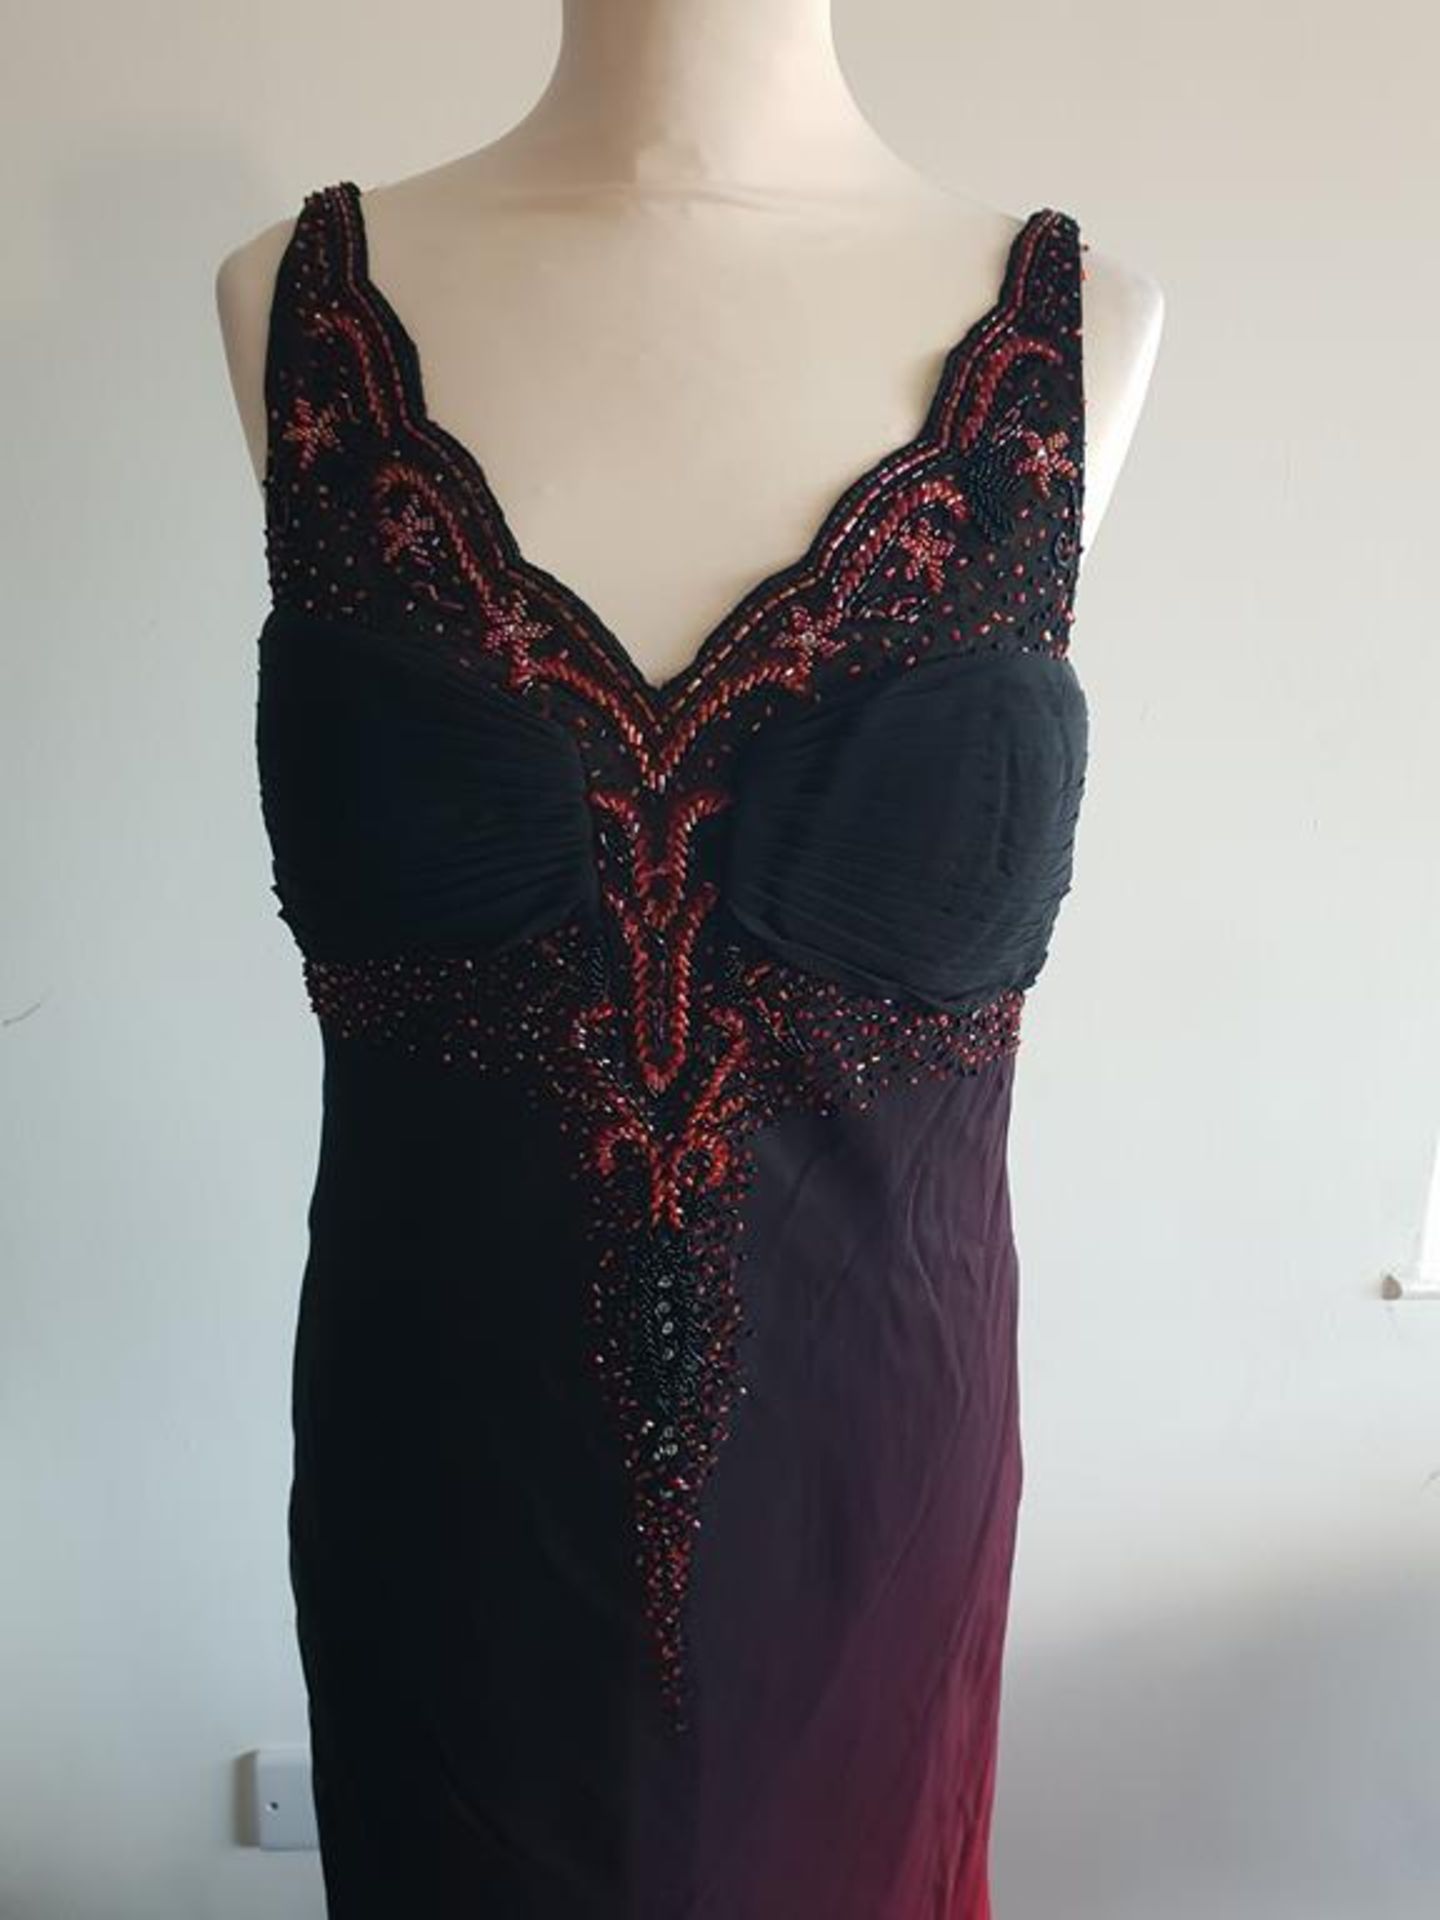 14 Dresses to include Princess 5397, red/black Evening Dress, sizes 1 x 12, 2 x 16, Hongyi 6888, - Image 2 of 28